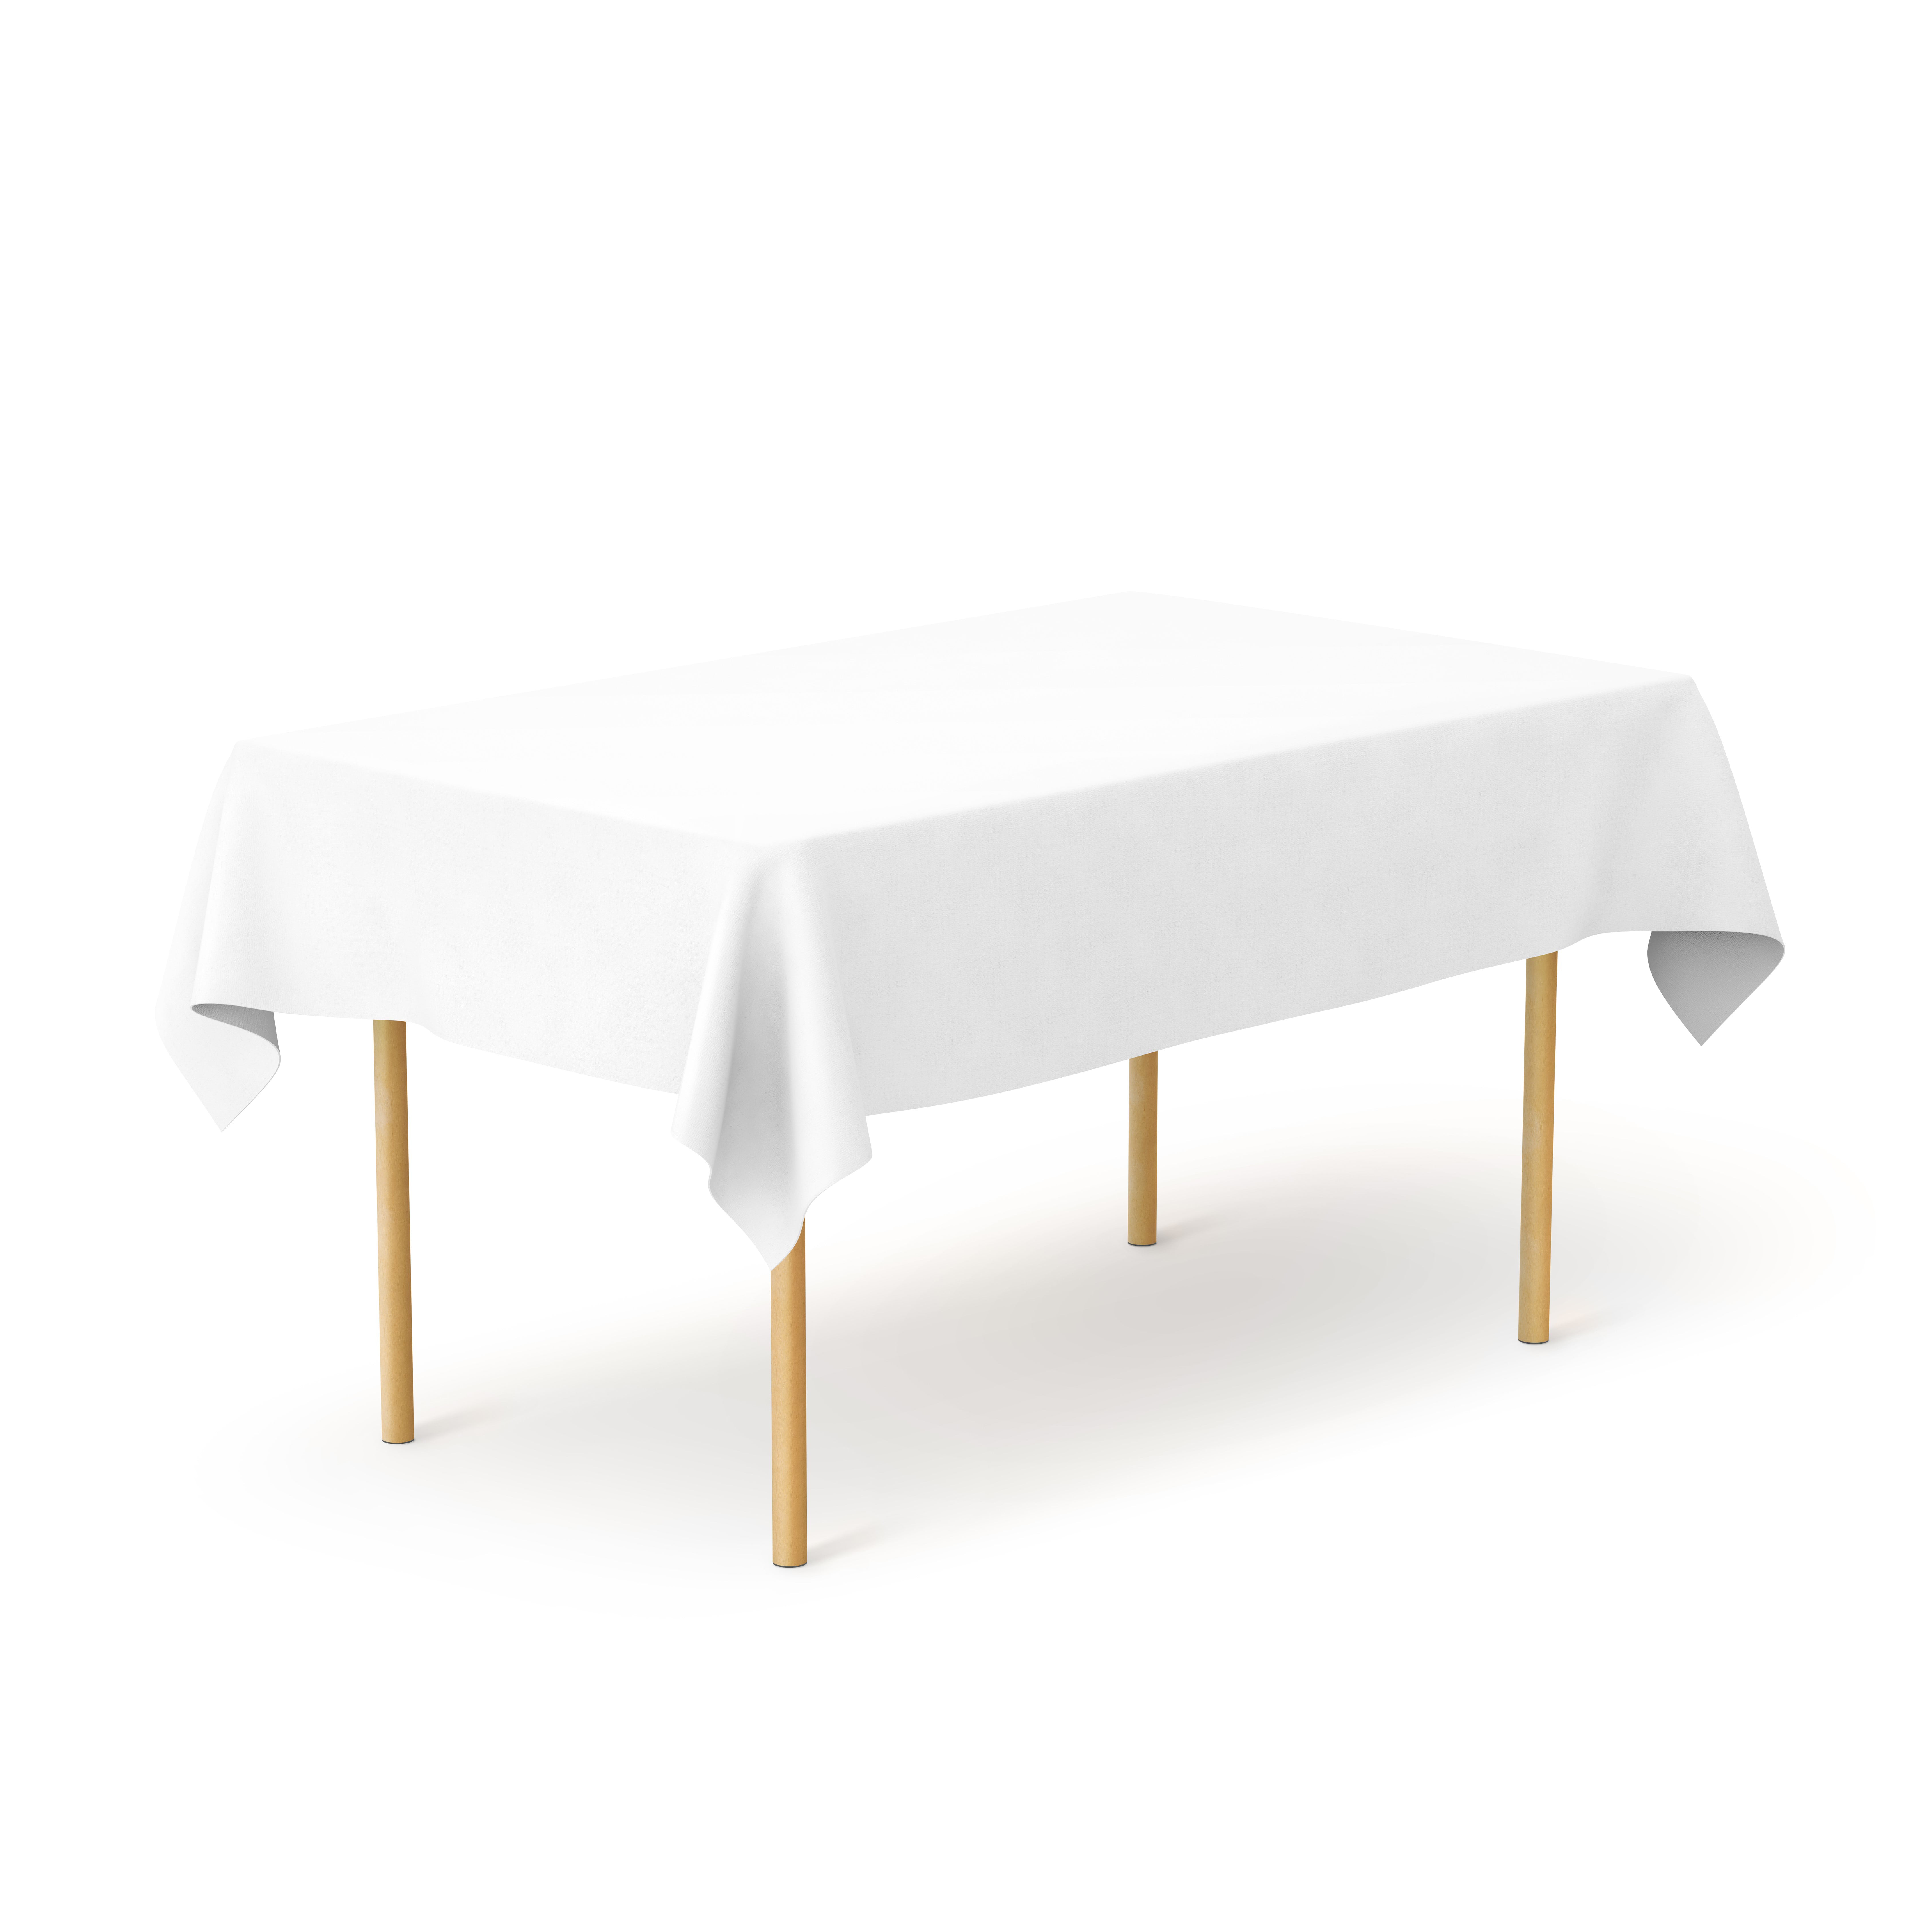 Pomp Pure White 90 x 132 Poplin Polyester Tablecloth Stain Resistant Easy Care Premium Fabric Fits 6FT Rectangle Table | Wrinkle 2 Pack